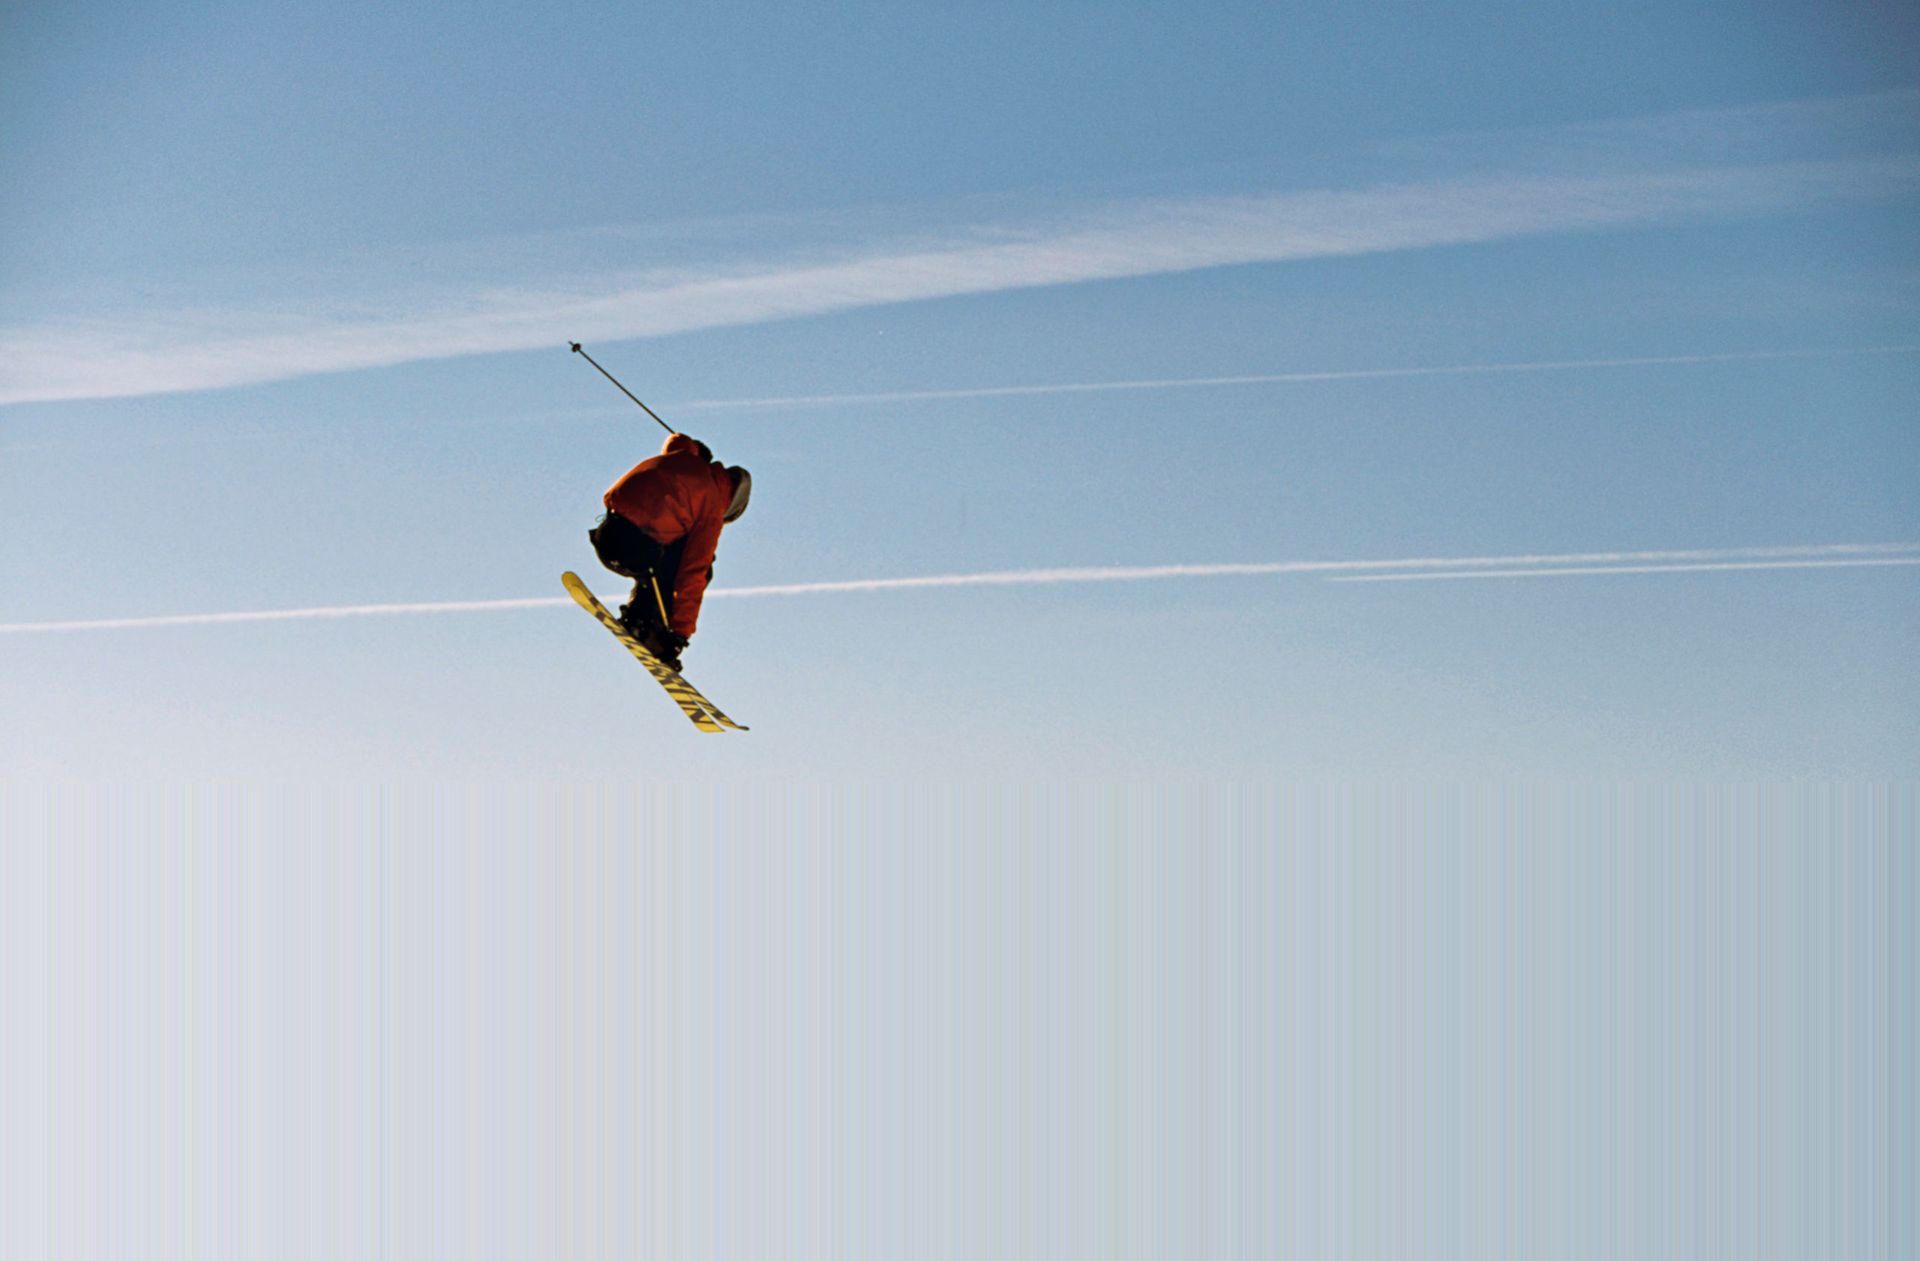 A person skiing.